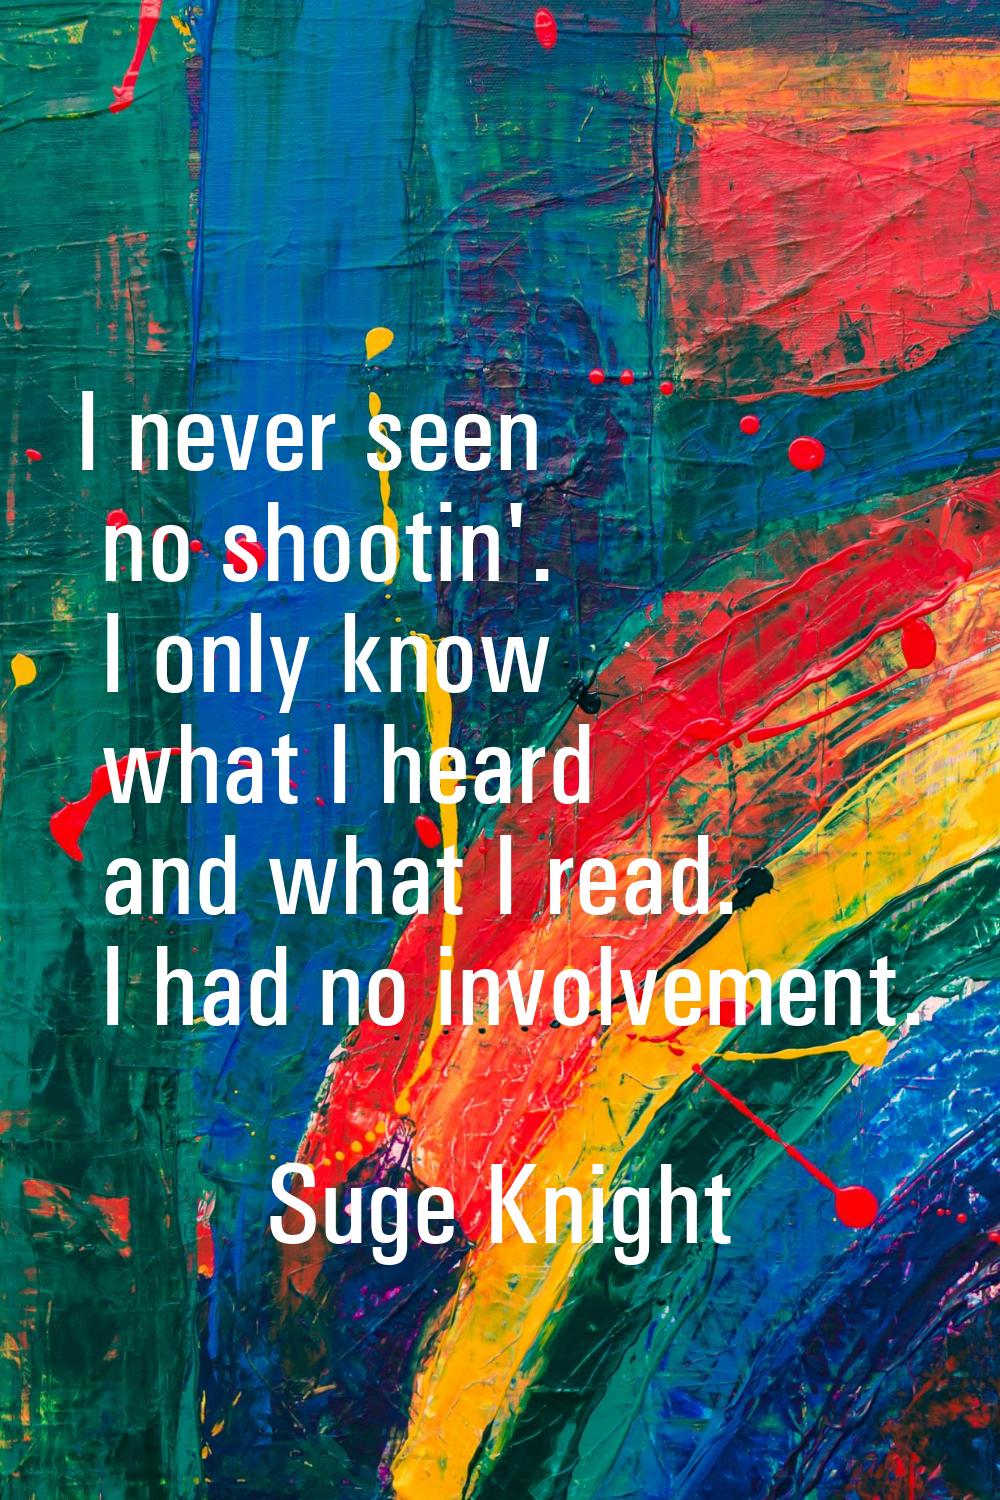 I never seen no shootin'. I only know what I heard and what I read. I had no involvement.